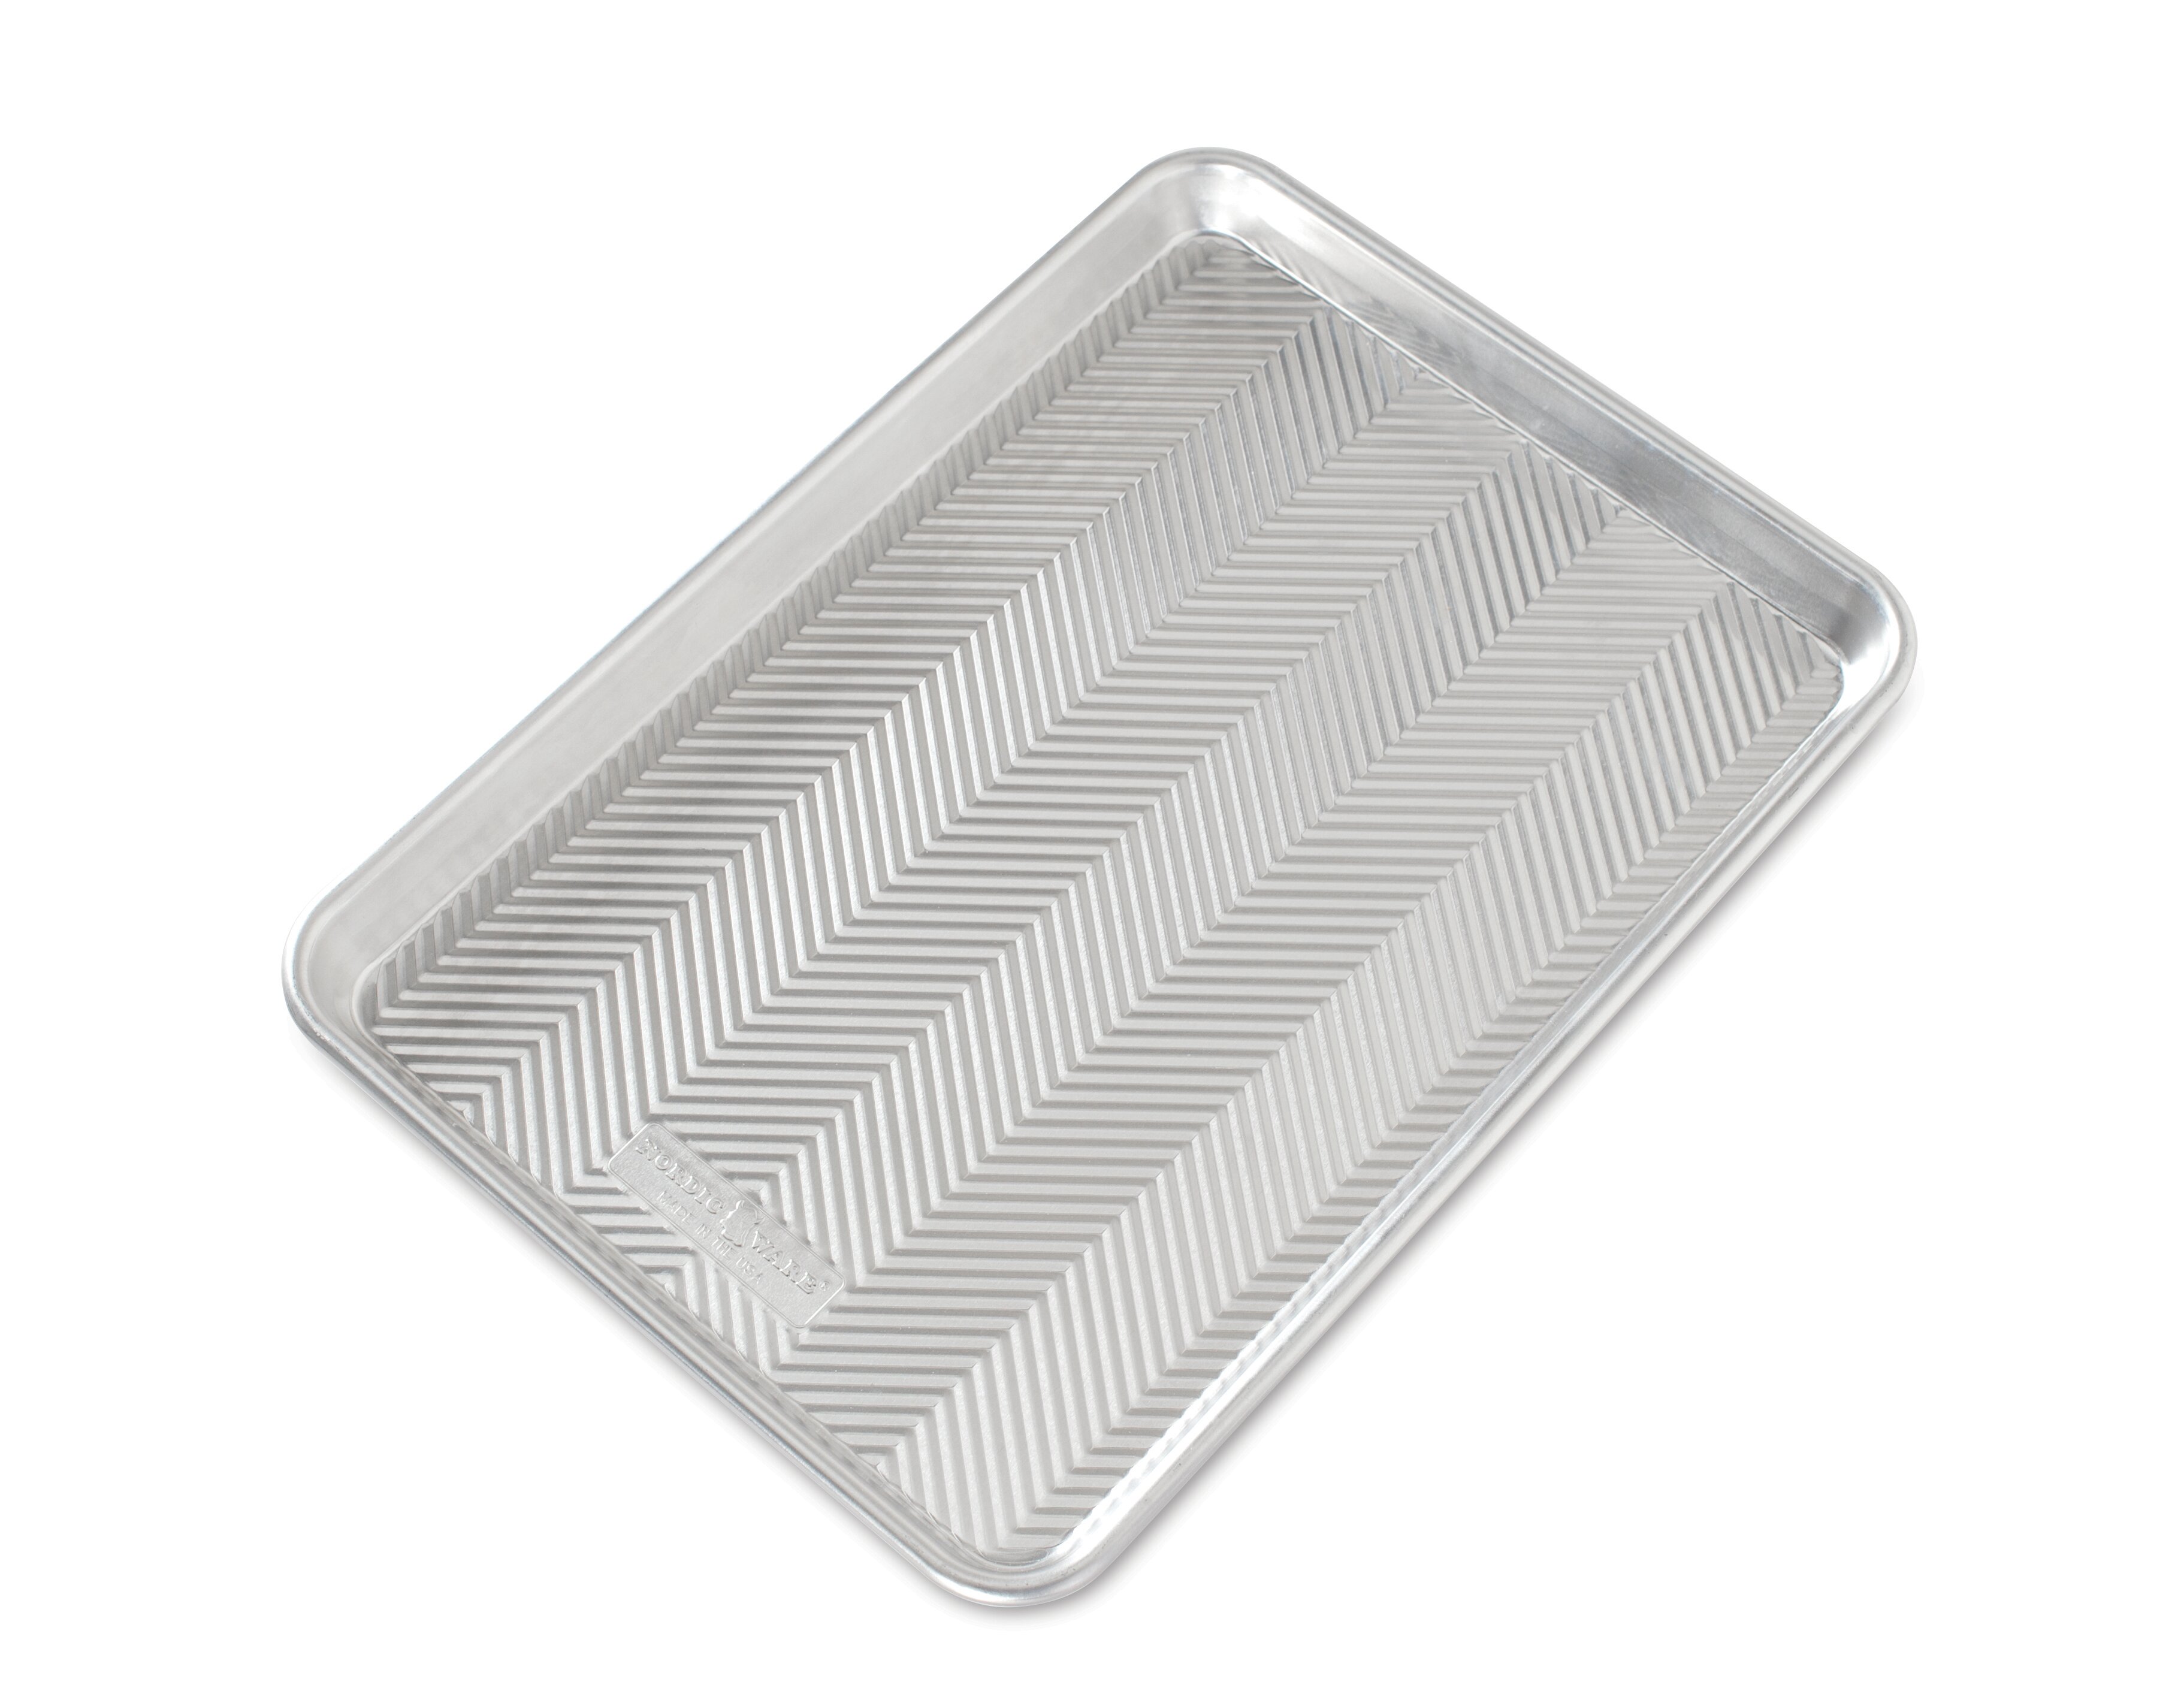 Nordic Ware Naturals Aluminum 3 Piece Sheet Pan Set, Jelly Roll, Quarter Sheet and Eighth Sheet Pans, Size: 13 inch x 18 inch